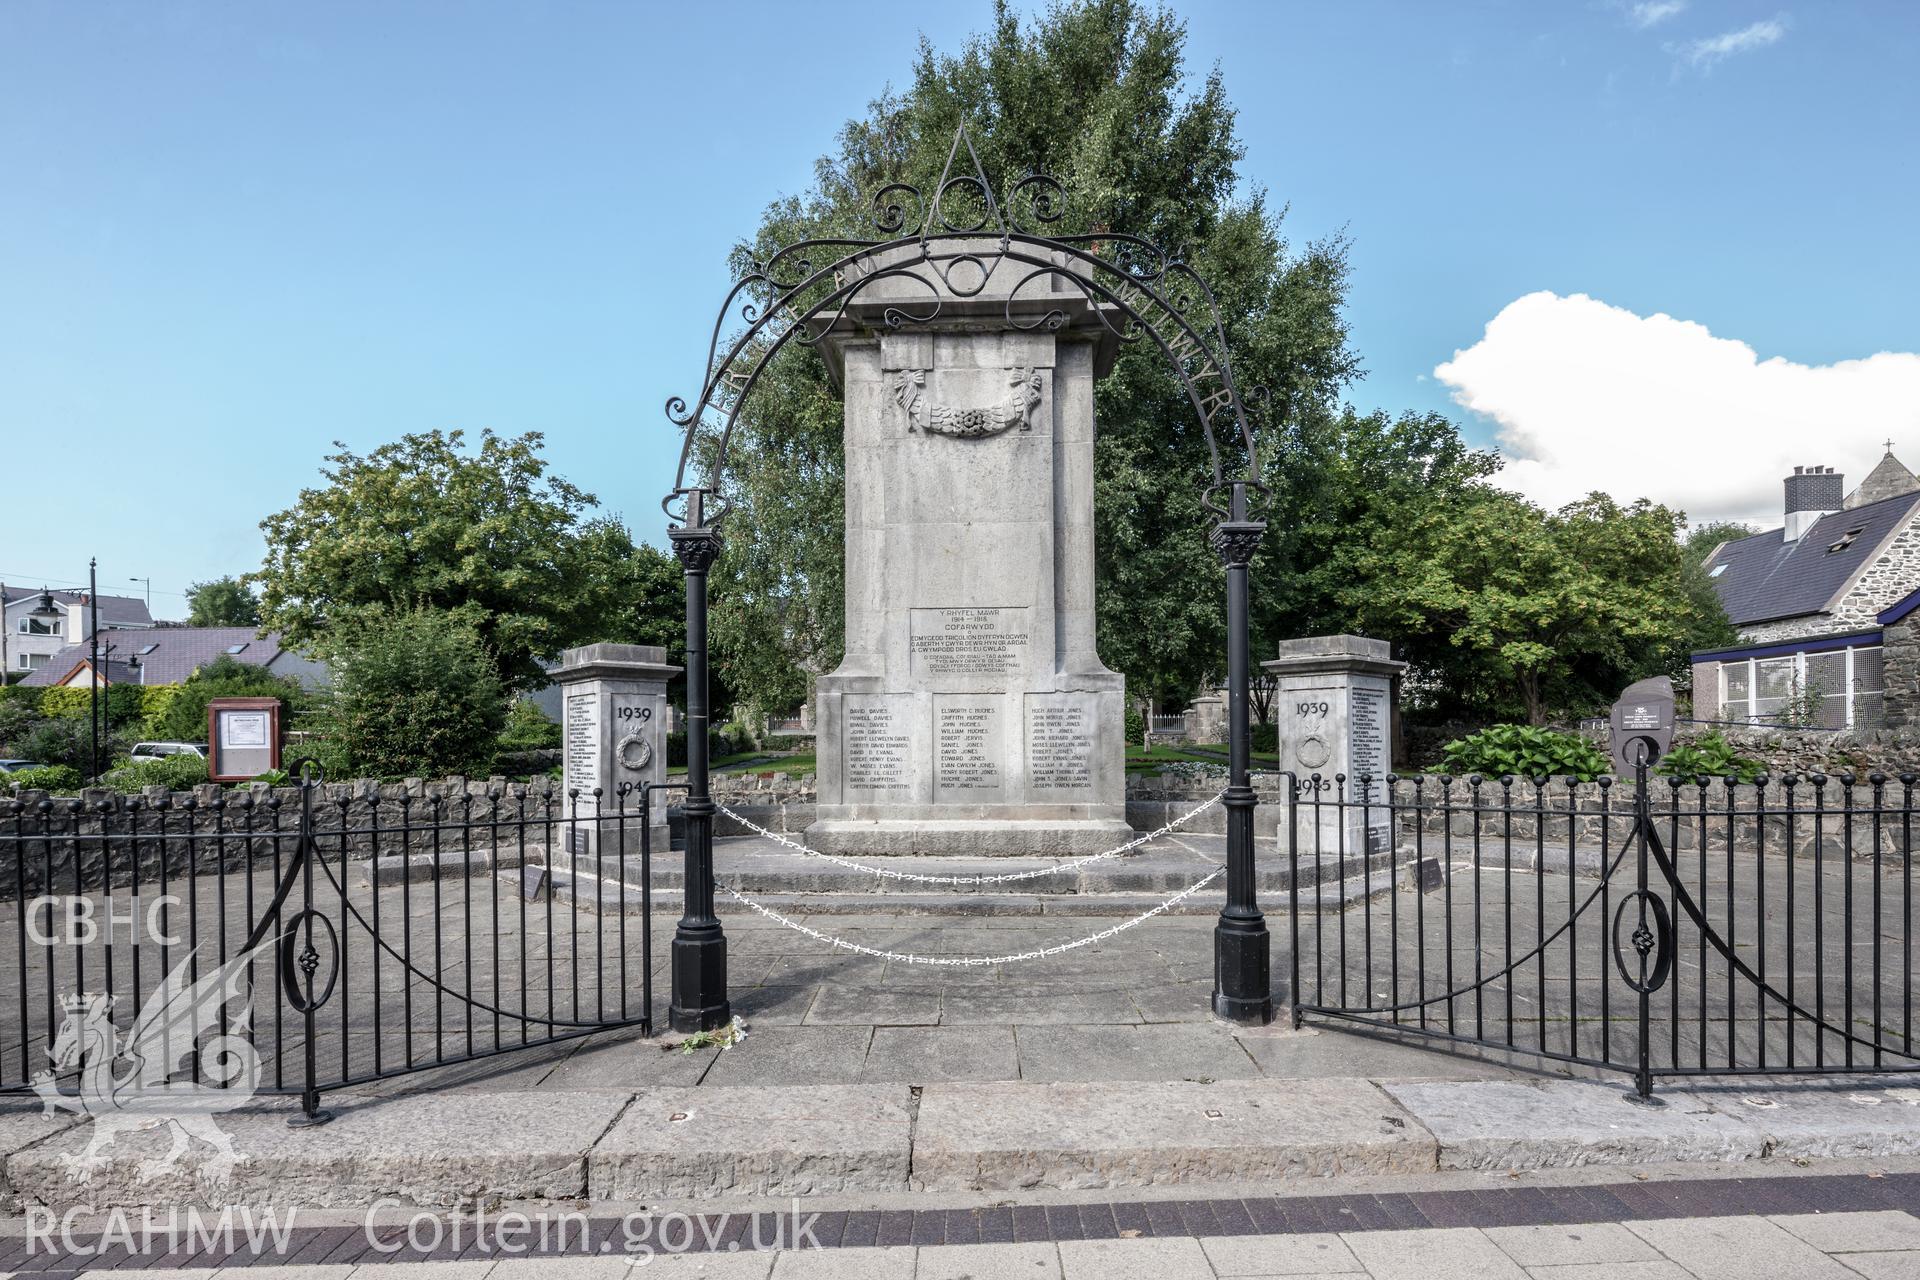 Cenotaph and entrance ironwork from the south southwest